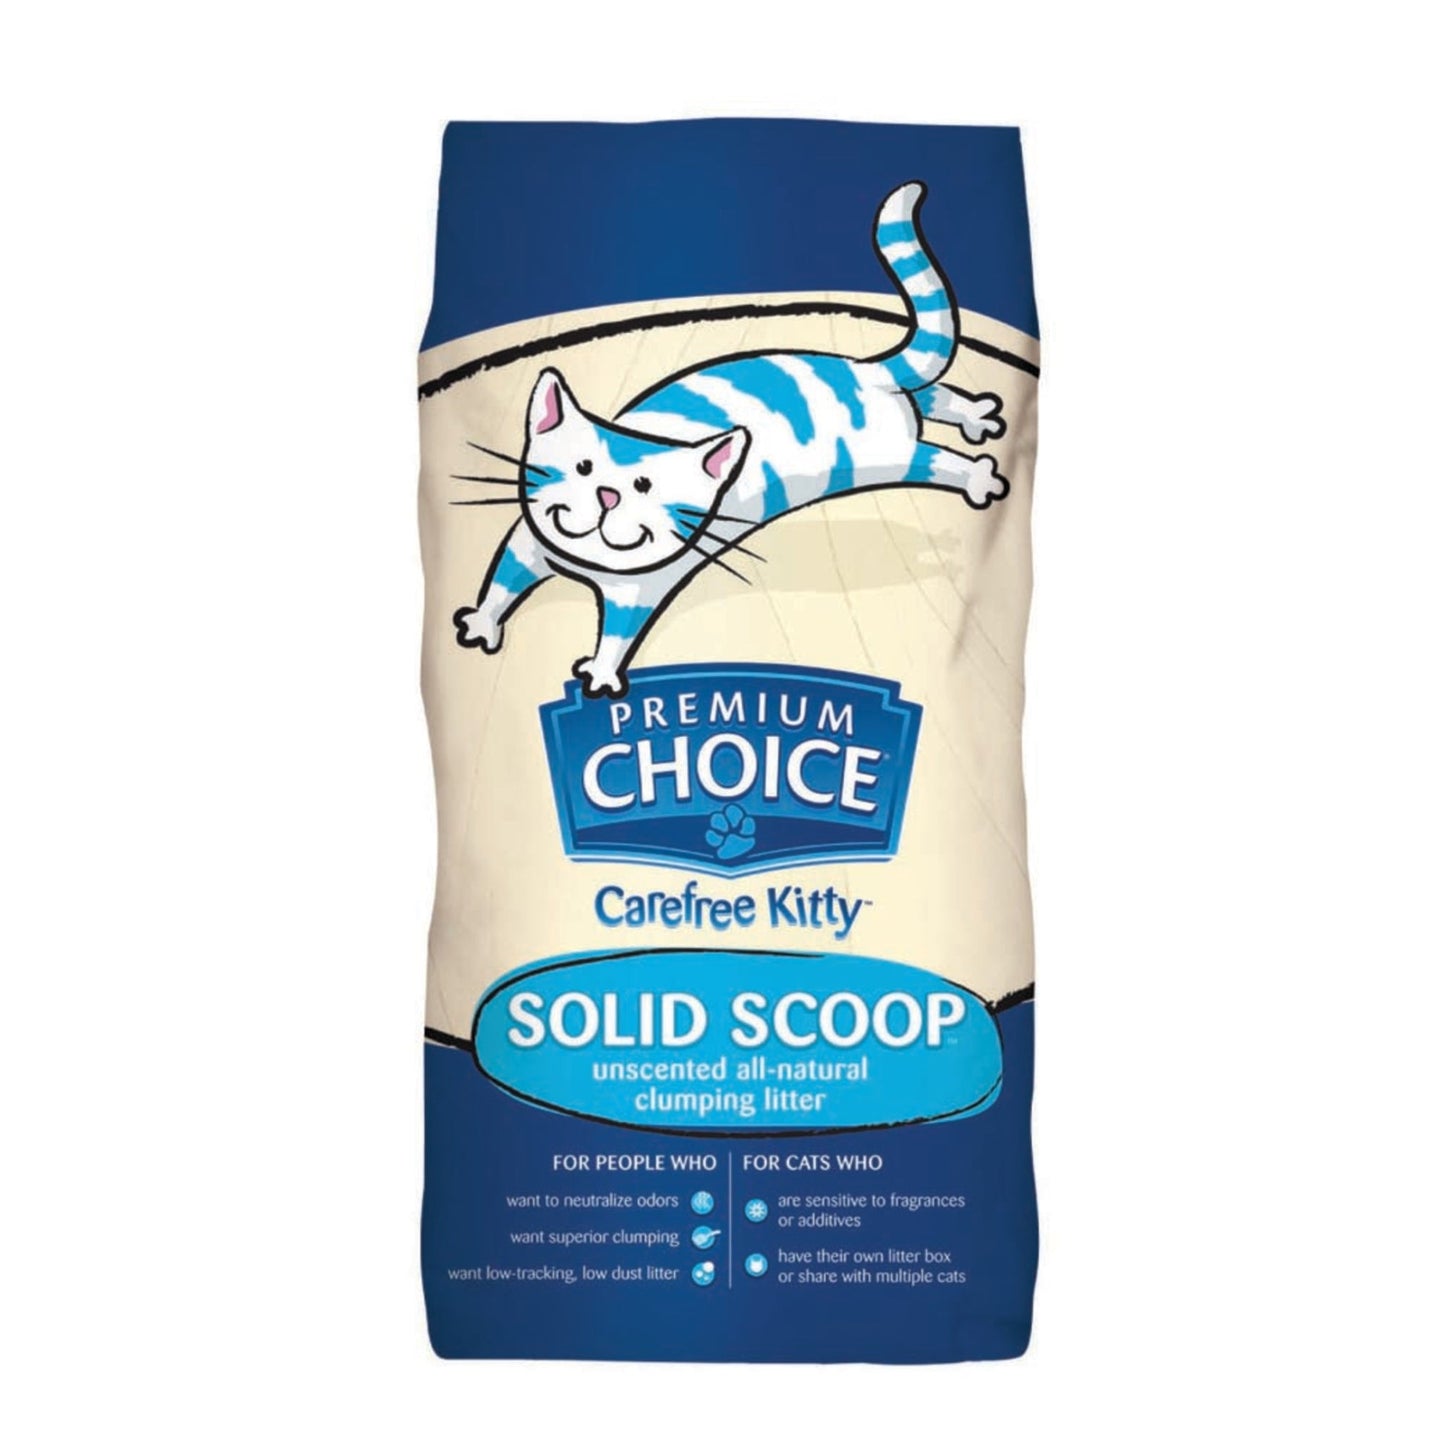 Premium Choice Litter Carefree Kitty Unscented All Natural Scoop Cat Litter 1ea/25 lb